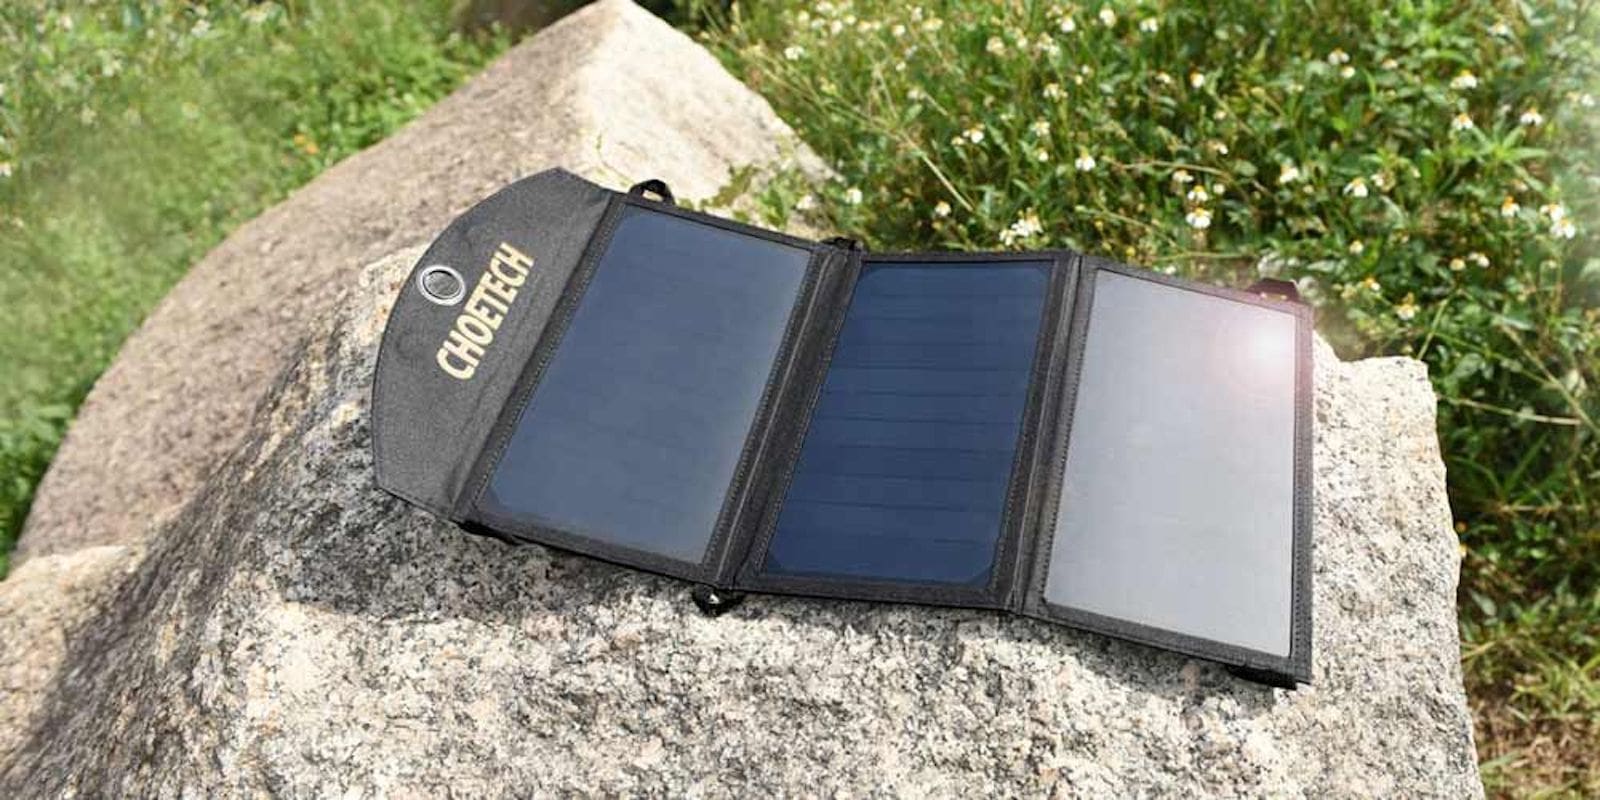 This tough, lightweight, foldable solar charger can charge up two USB devices at once.